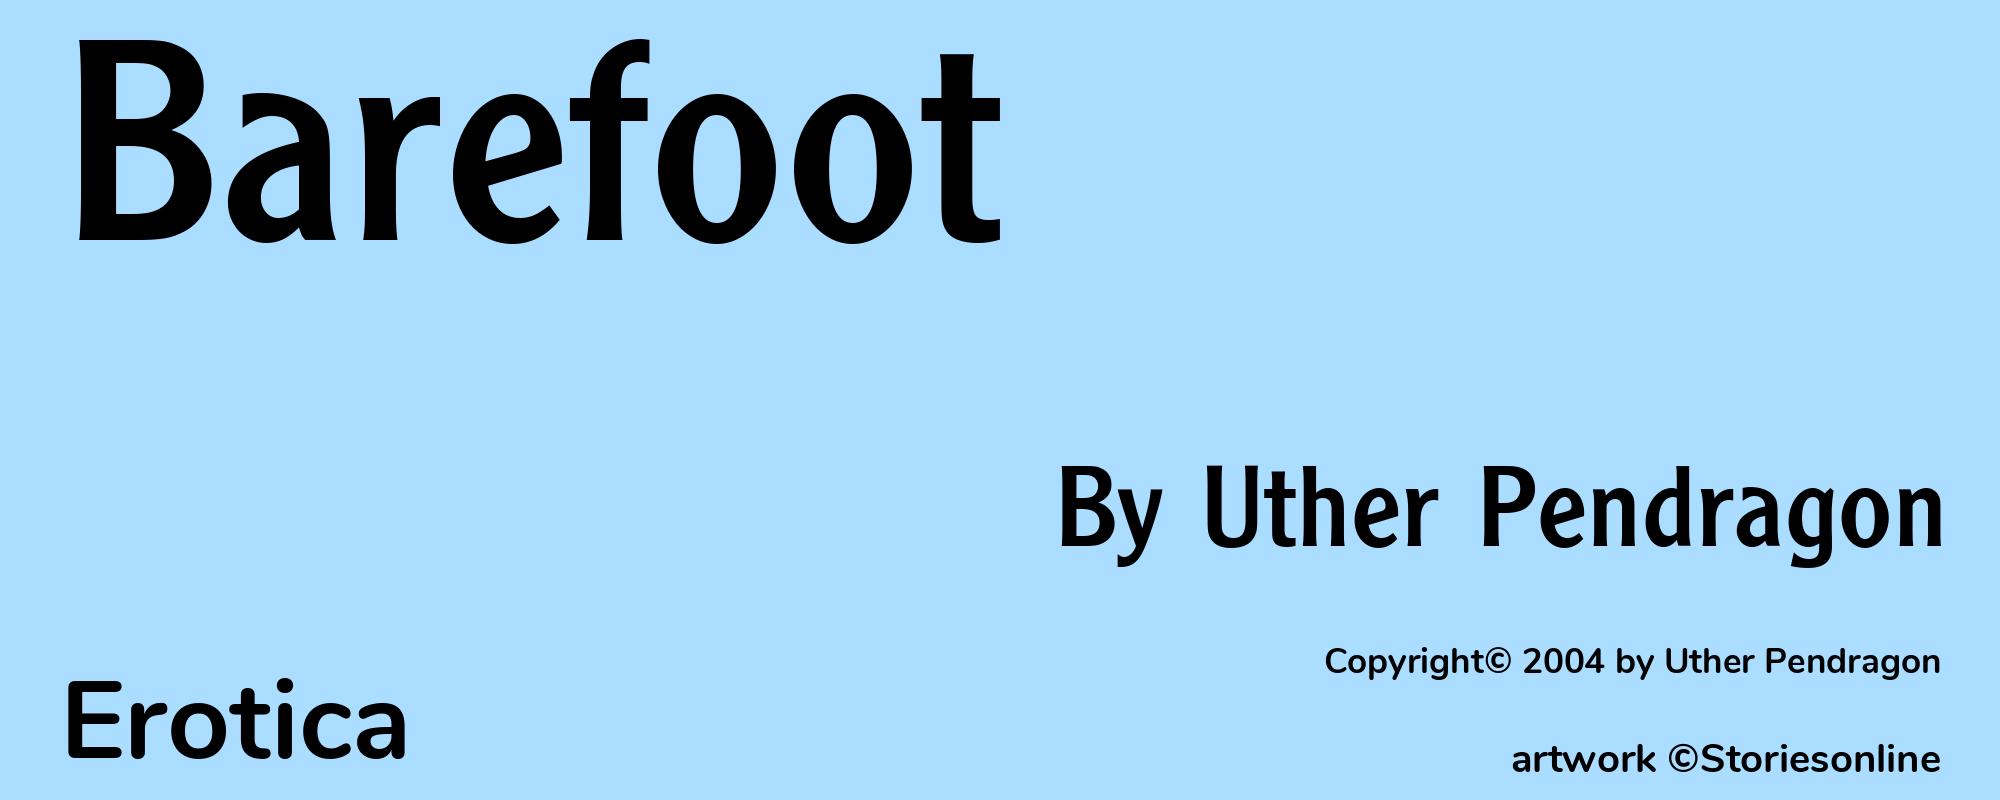 Barefoot - Cover